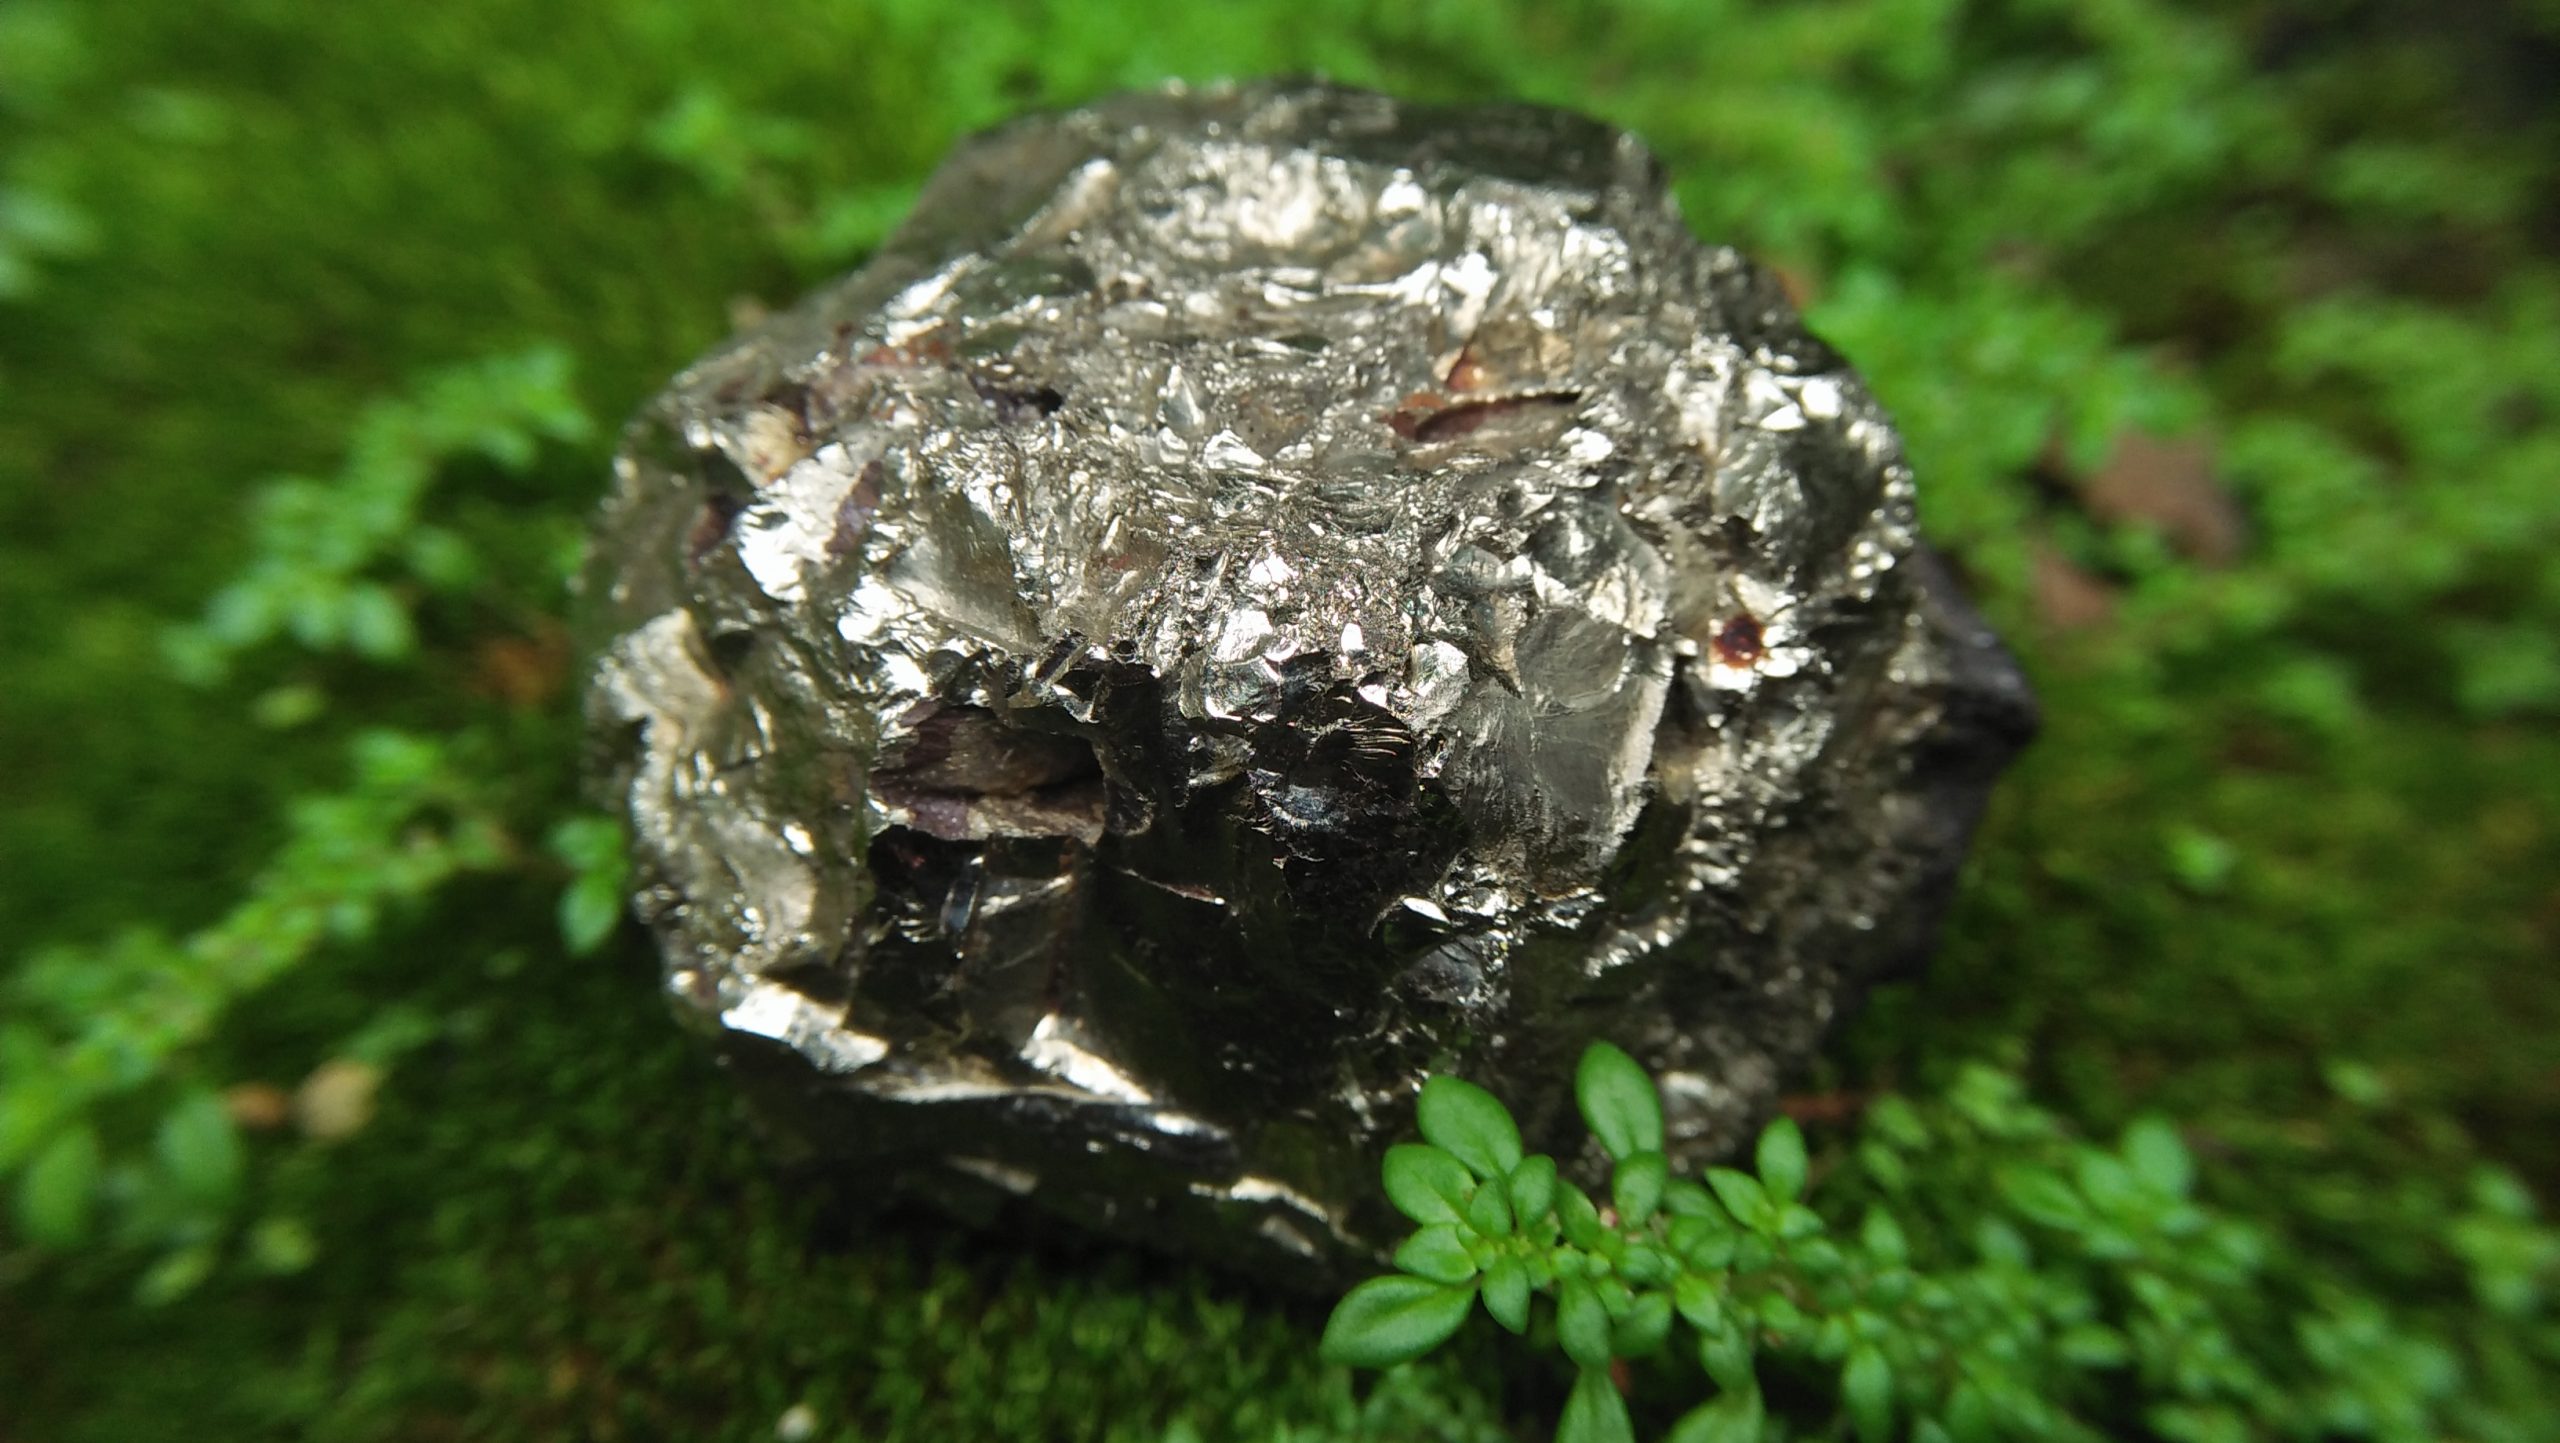 The mineral pyrite, or iron pyrite, also known as fool's gold, is an iron sulfide with the chemical formula FeS₂. Pyrite is considered the most common of the sulfide minerals. Pyrite's metallic luster and pale brass-yellow hue give it a superficial resemblance to gold, hence the well-known nickname of fool's gold. Hardness: 6–6.5 Luster: Metallic, glistening Pyrite enjoyed brief popularity in the 16th and 17th centuries as a source of ignition in earlyfirearms, most notably the wheellock, where the cock held a lump of pyrite against a circular file to strike the sparks needed to fire the gun. Pyrite is a very protective stone, shielding the user from negativeenergy of all kinds and promotes good physical health and emotional well-being.